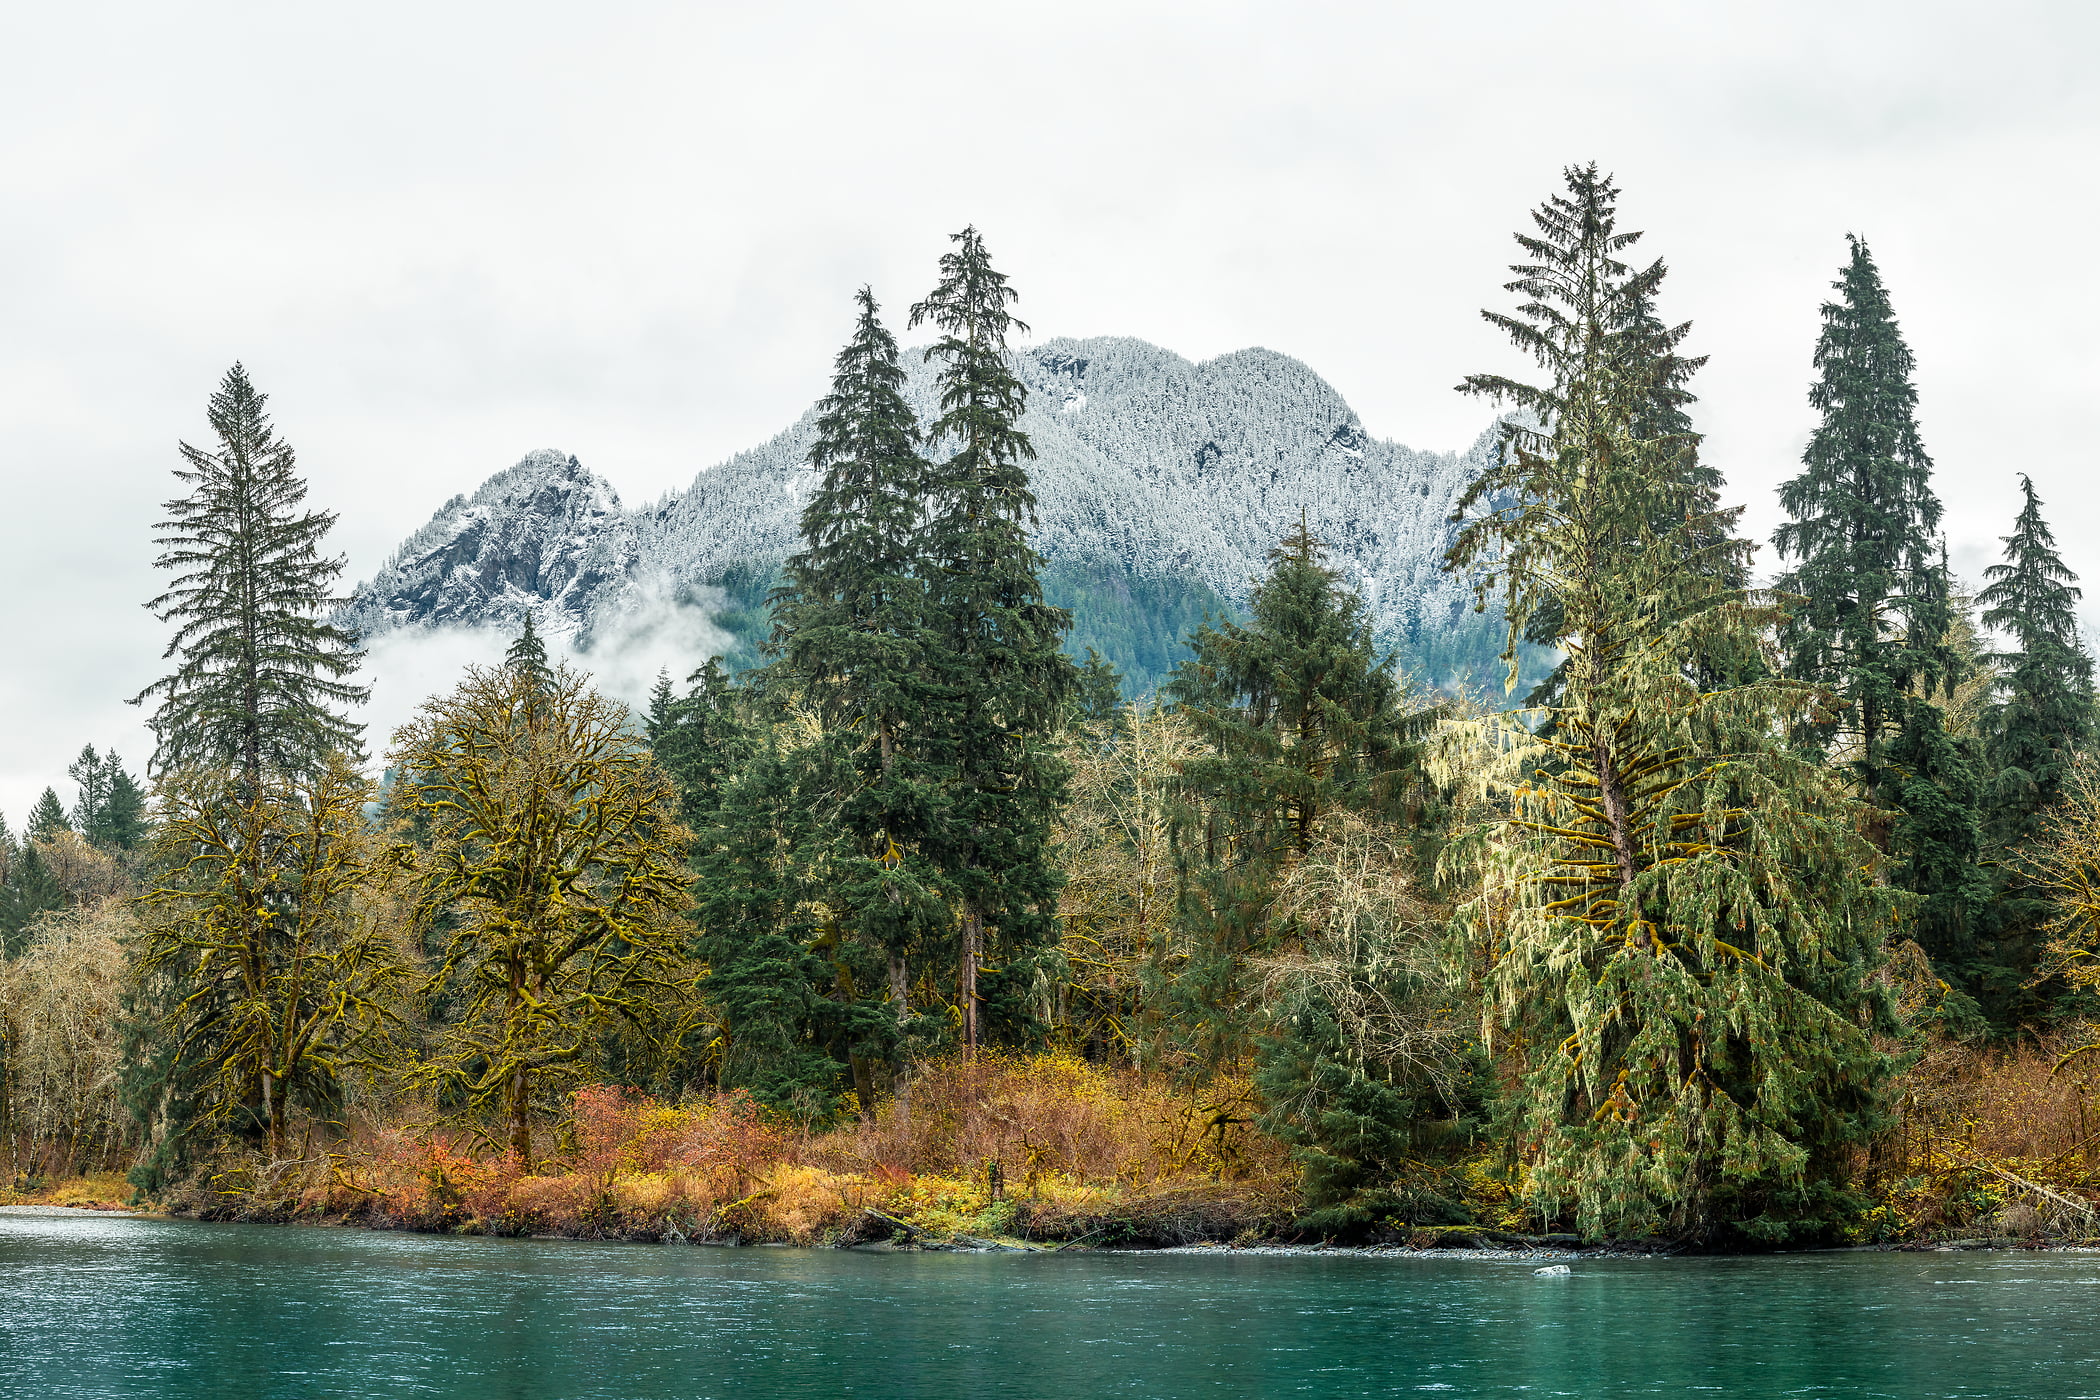 357 megapixels! A very high resolution, large-format VAST photo print of a river with evergreen trees and a mountain; nature photograph created by Scott Rinckenberger in Middle Fork of Snoqualmie River, North Bend, Washington